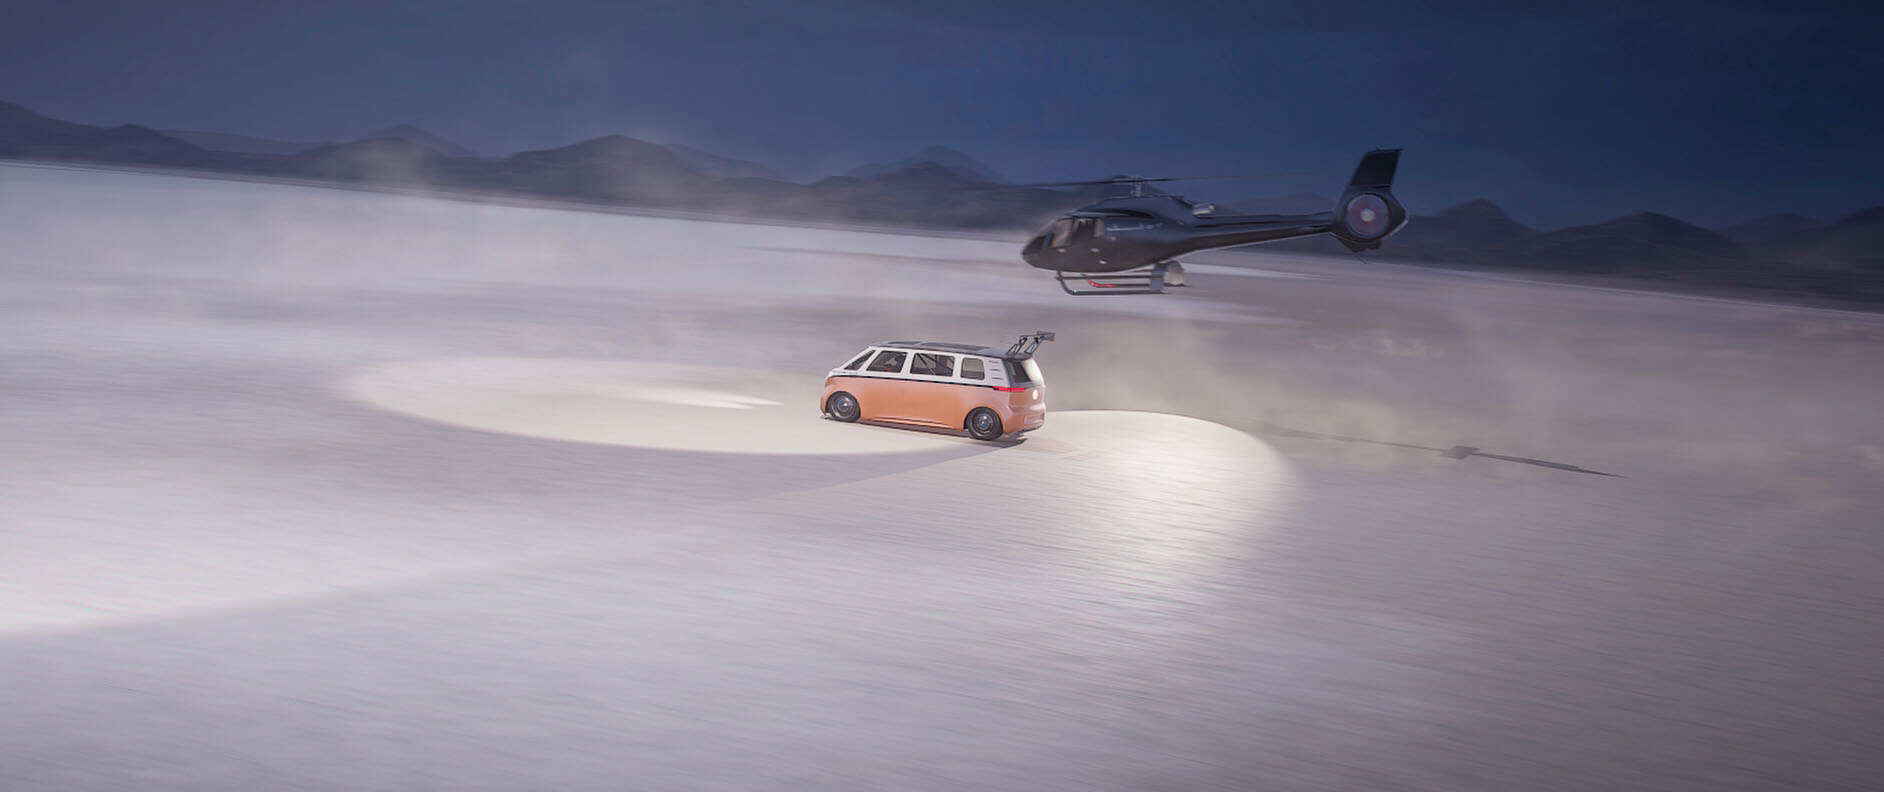 ID Buzz Concept Salt Flats Racer Created with Unreal Engine 5 - by Lee Powers